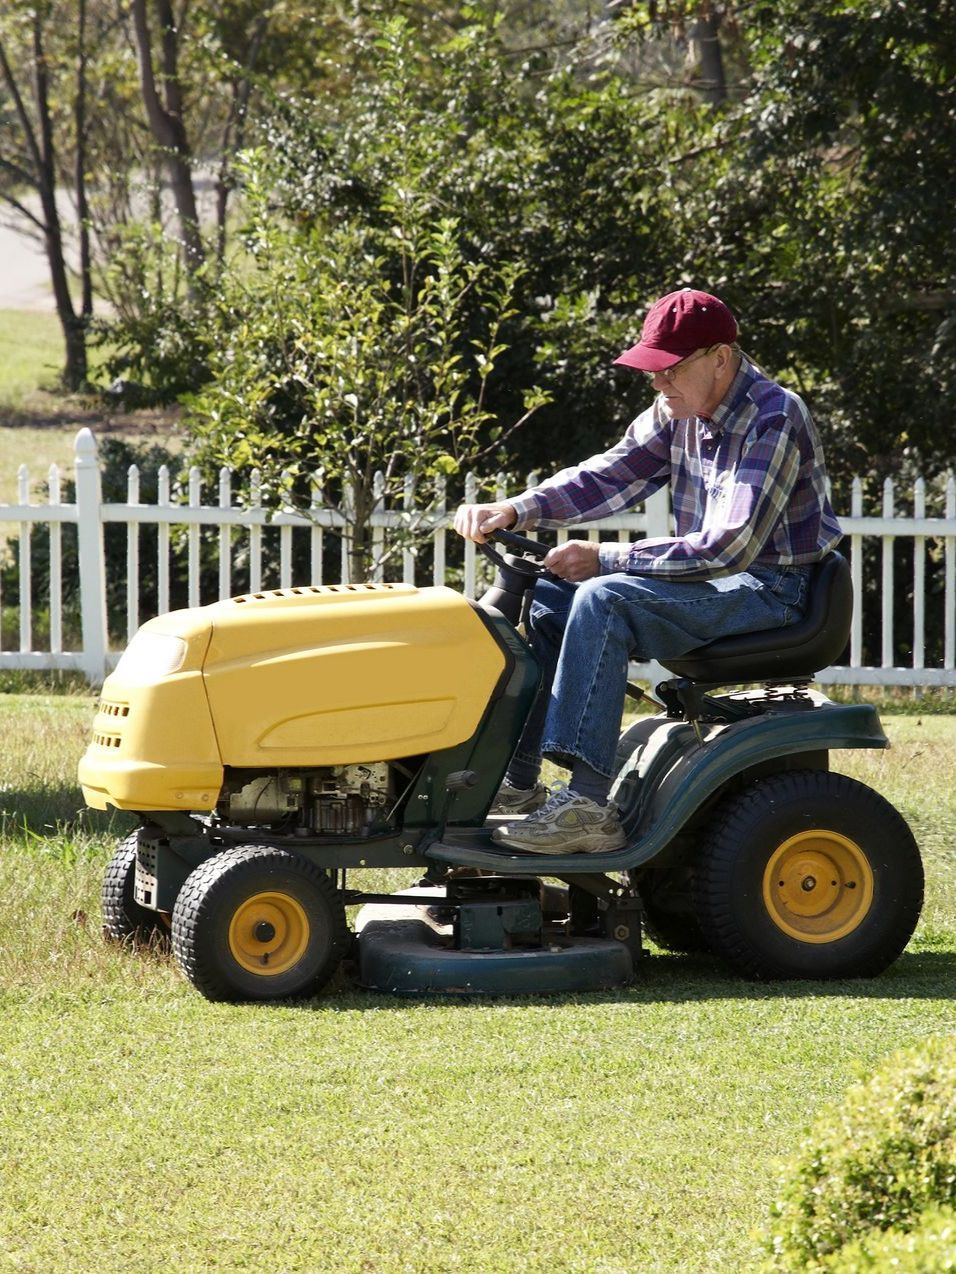 a man is riding a yellow lawn mower on a lush green lawn